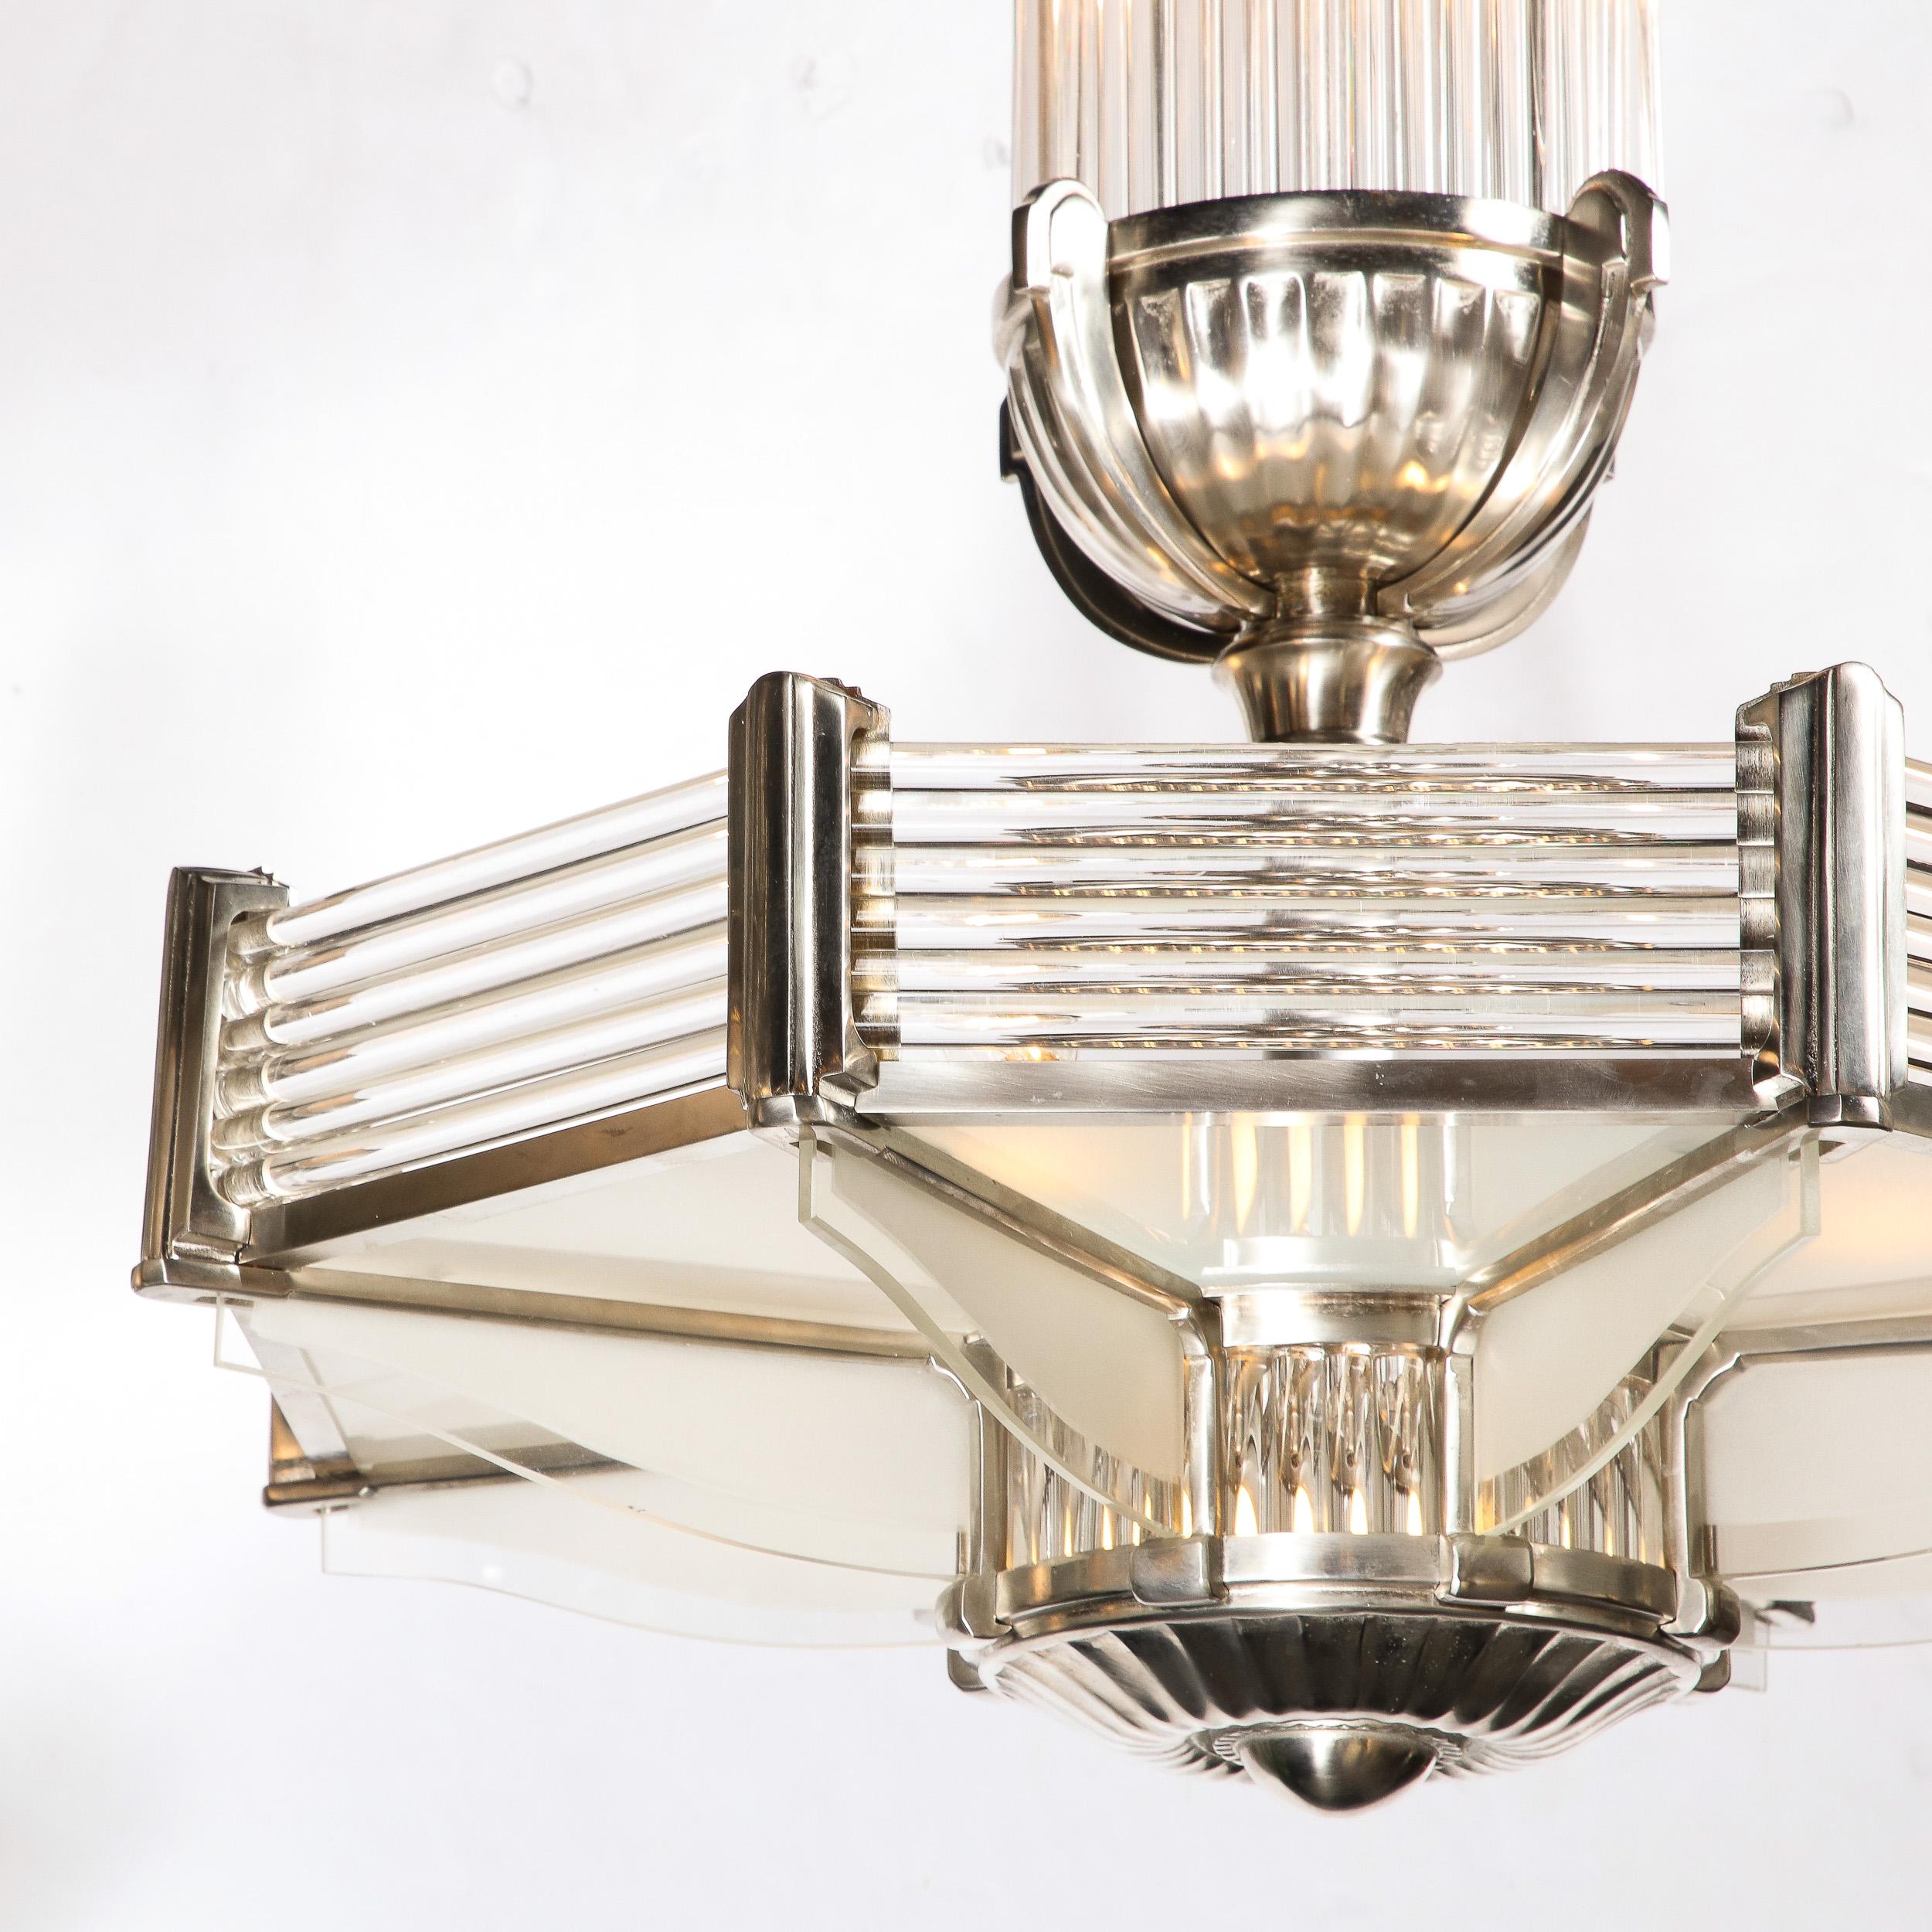 French Art Deco Chandelier in Satin Nickel & Transparent Glass Rods by Atelier Petitot